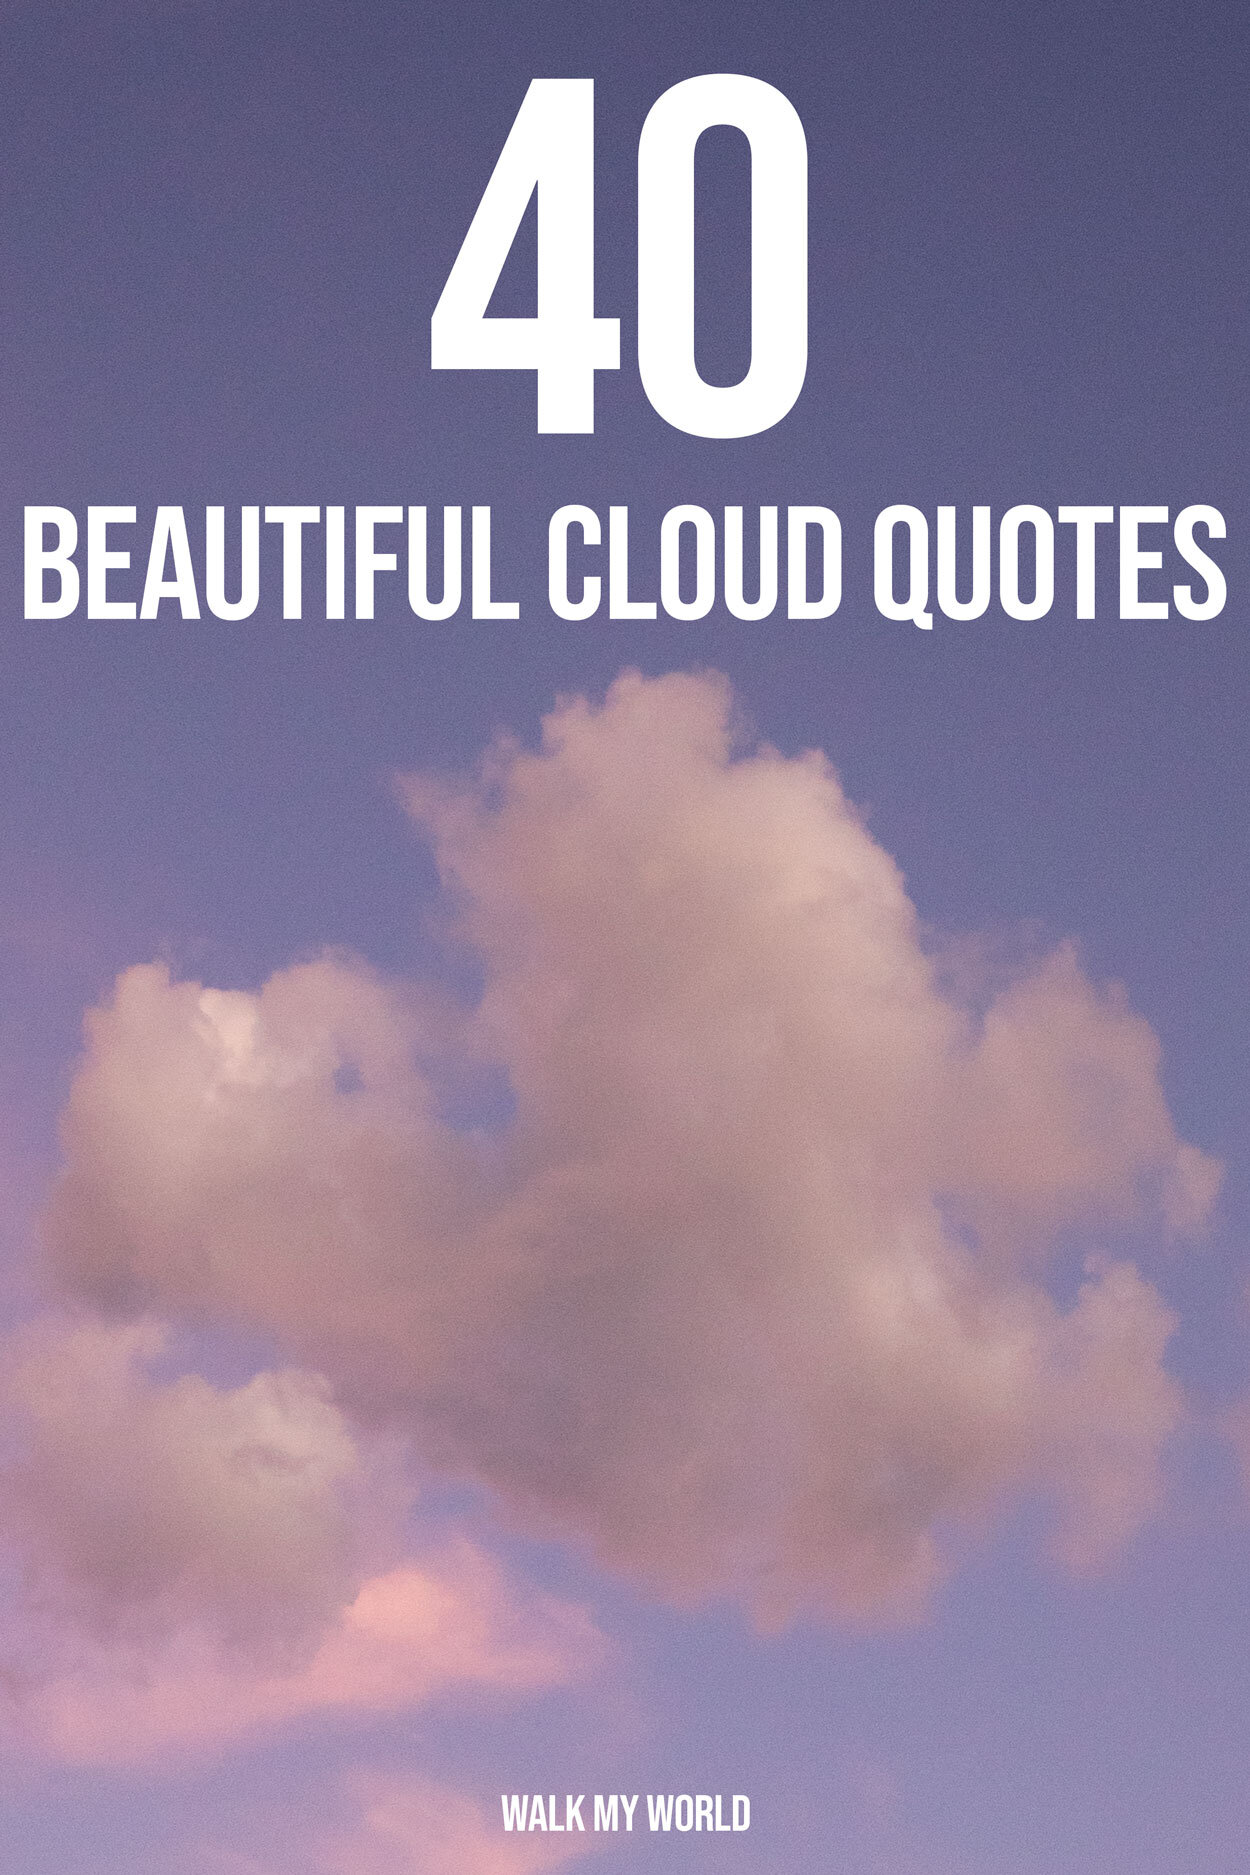 40 Inspirational Cloud Quotes to brighten your day — Walk My World